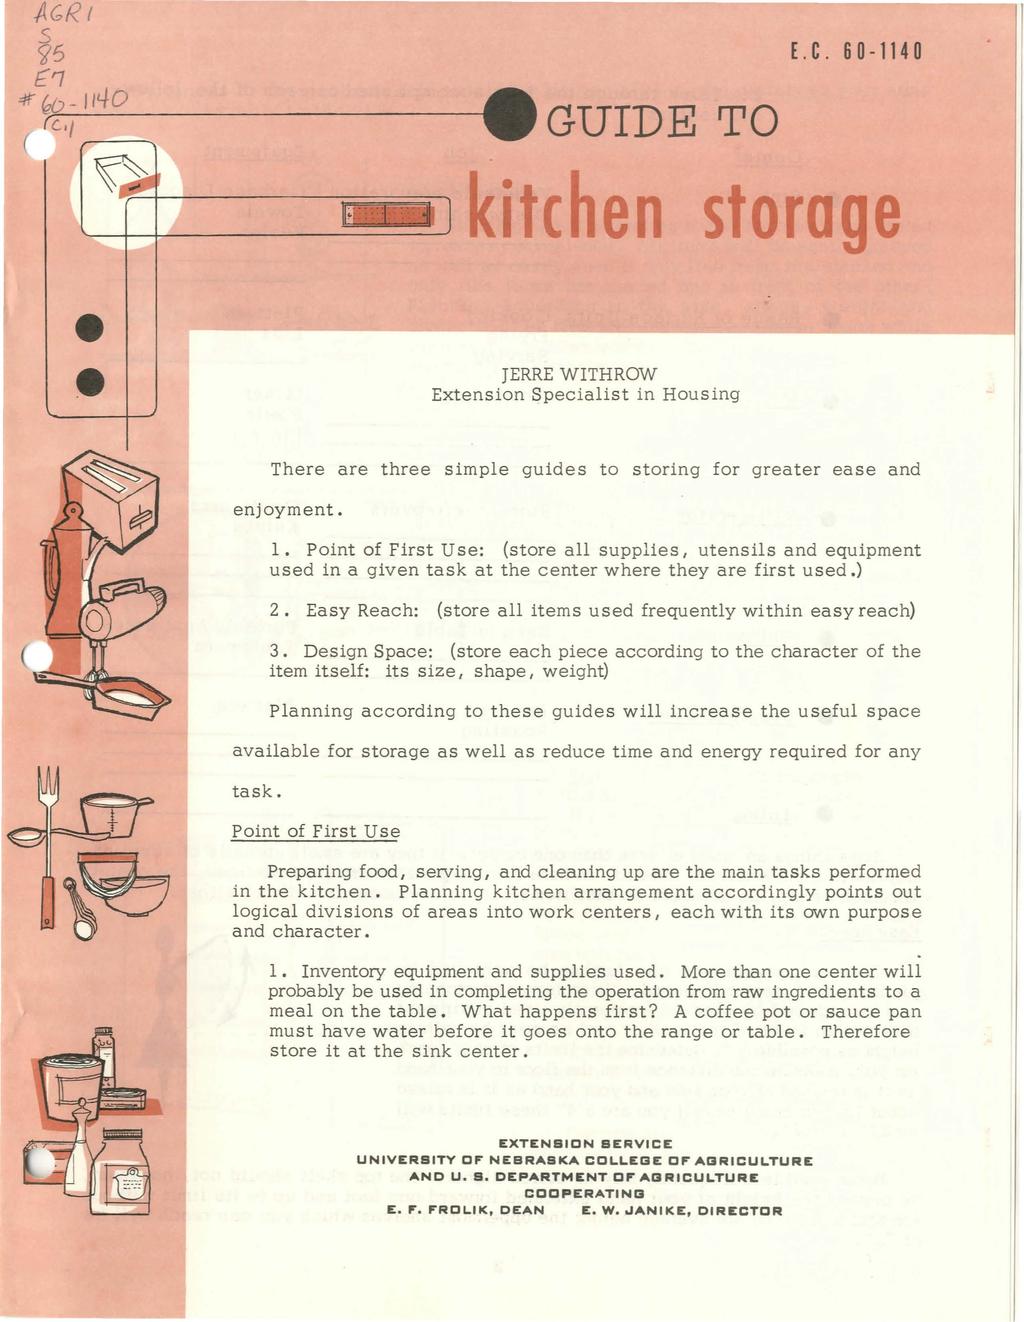 -AGRt s (j5 ~ :tr - lltfd c.,,----... GUDE TO E.C. 60-1140 i chen storage e e JERRE WTHROW Extension Specialist in Housing There are three simple guides to storing for greater ease and enjoyment. l. Point of First Use: (store all supplies 1 utensils and equipment used in a given task at the center where they are first used.